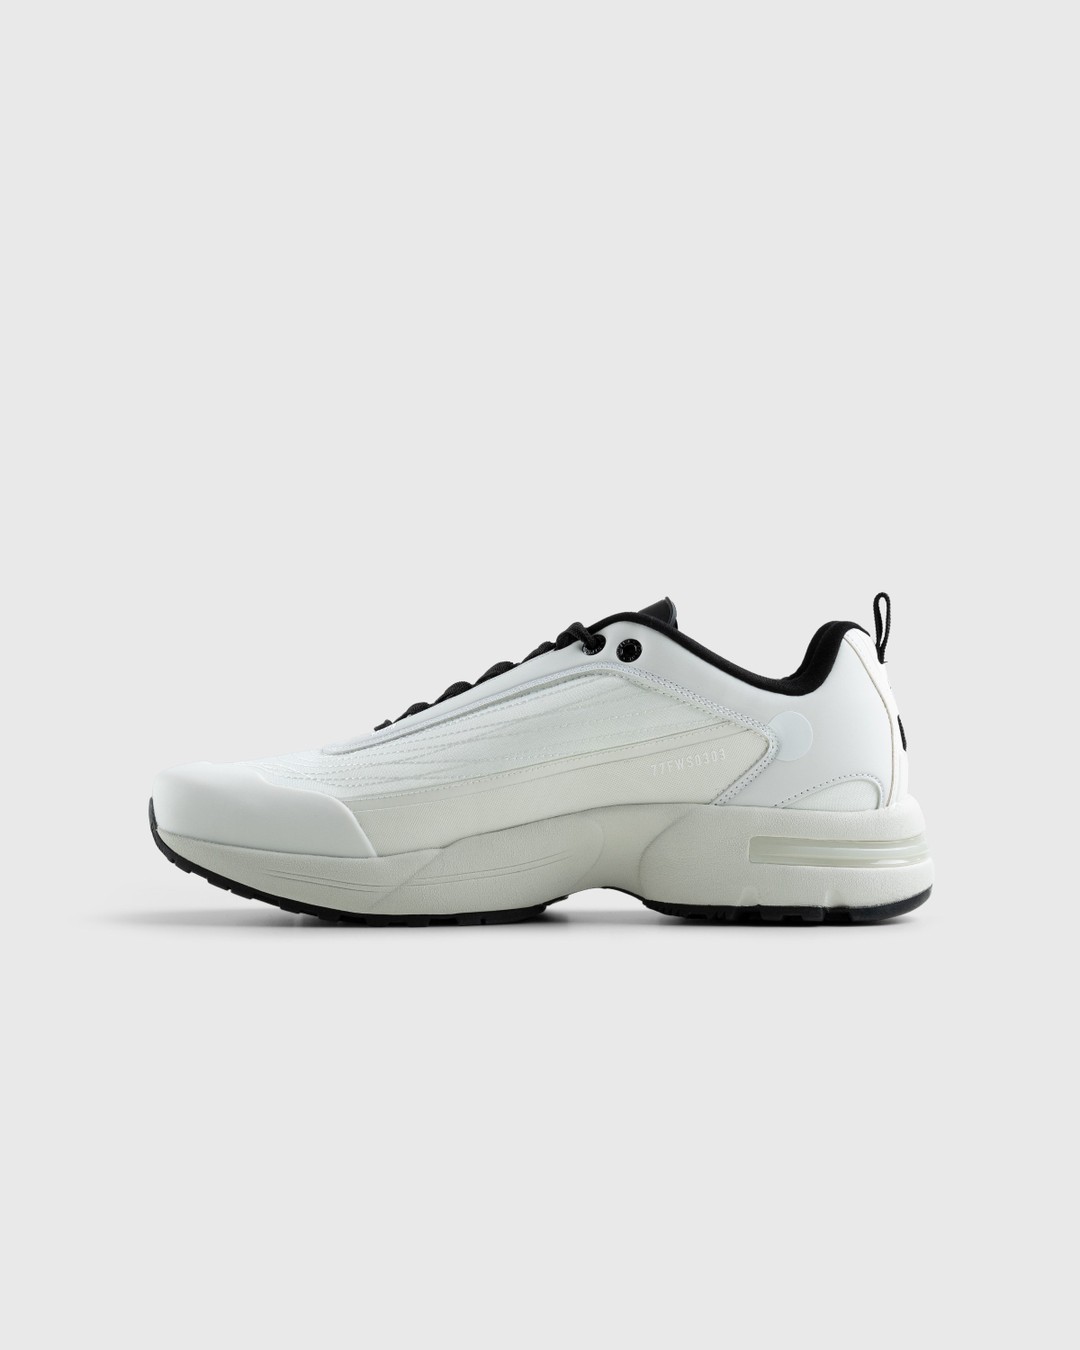 Stone Island – Grime Sneaker White - Low Top Sneakers - White - Image 2